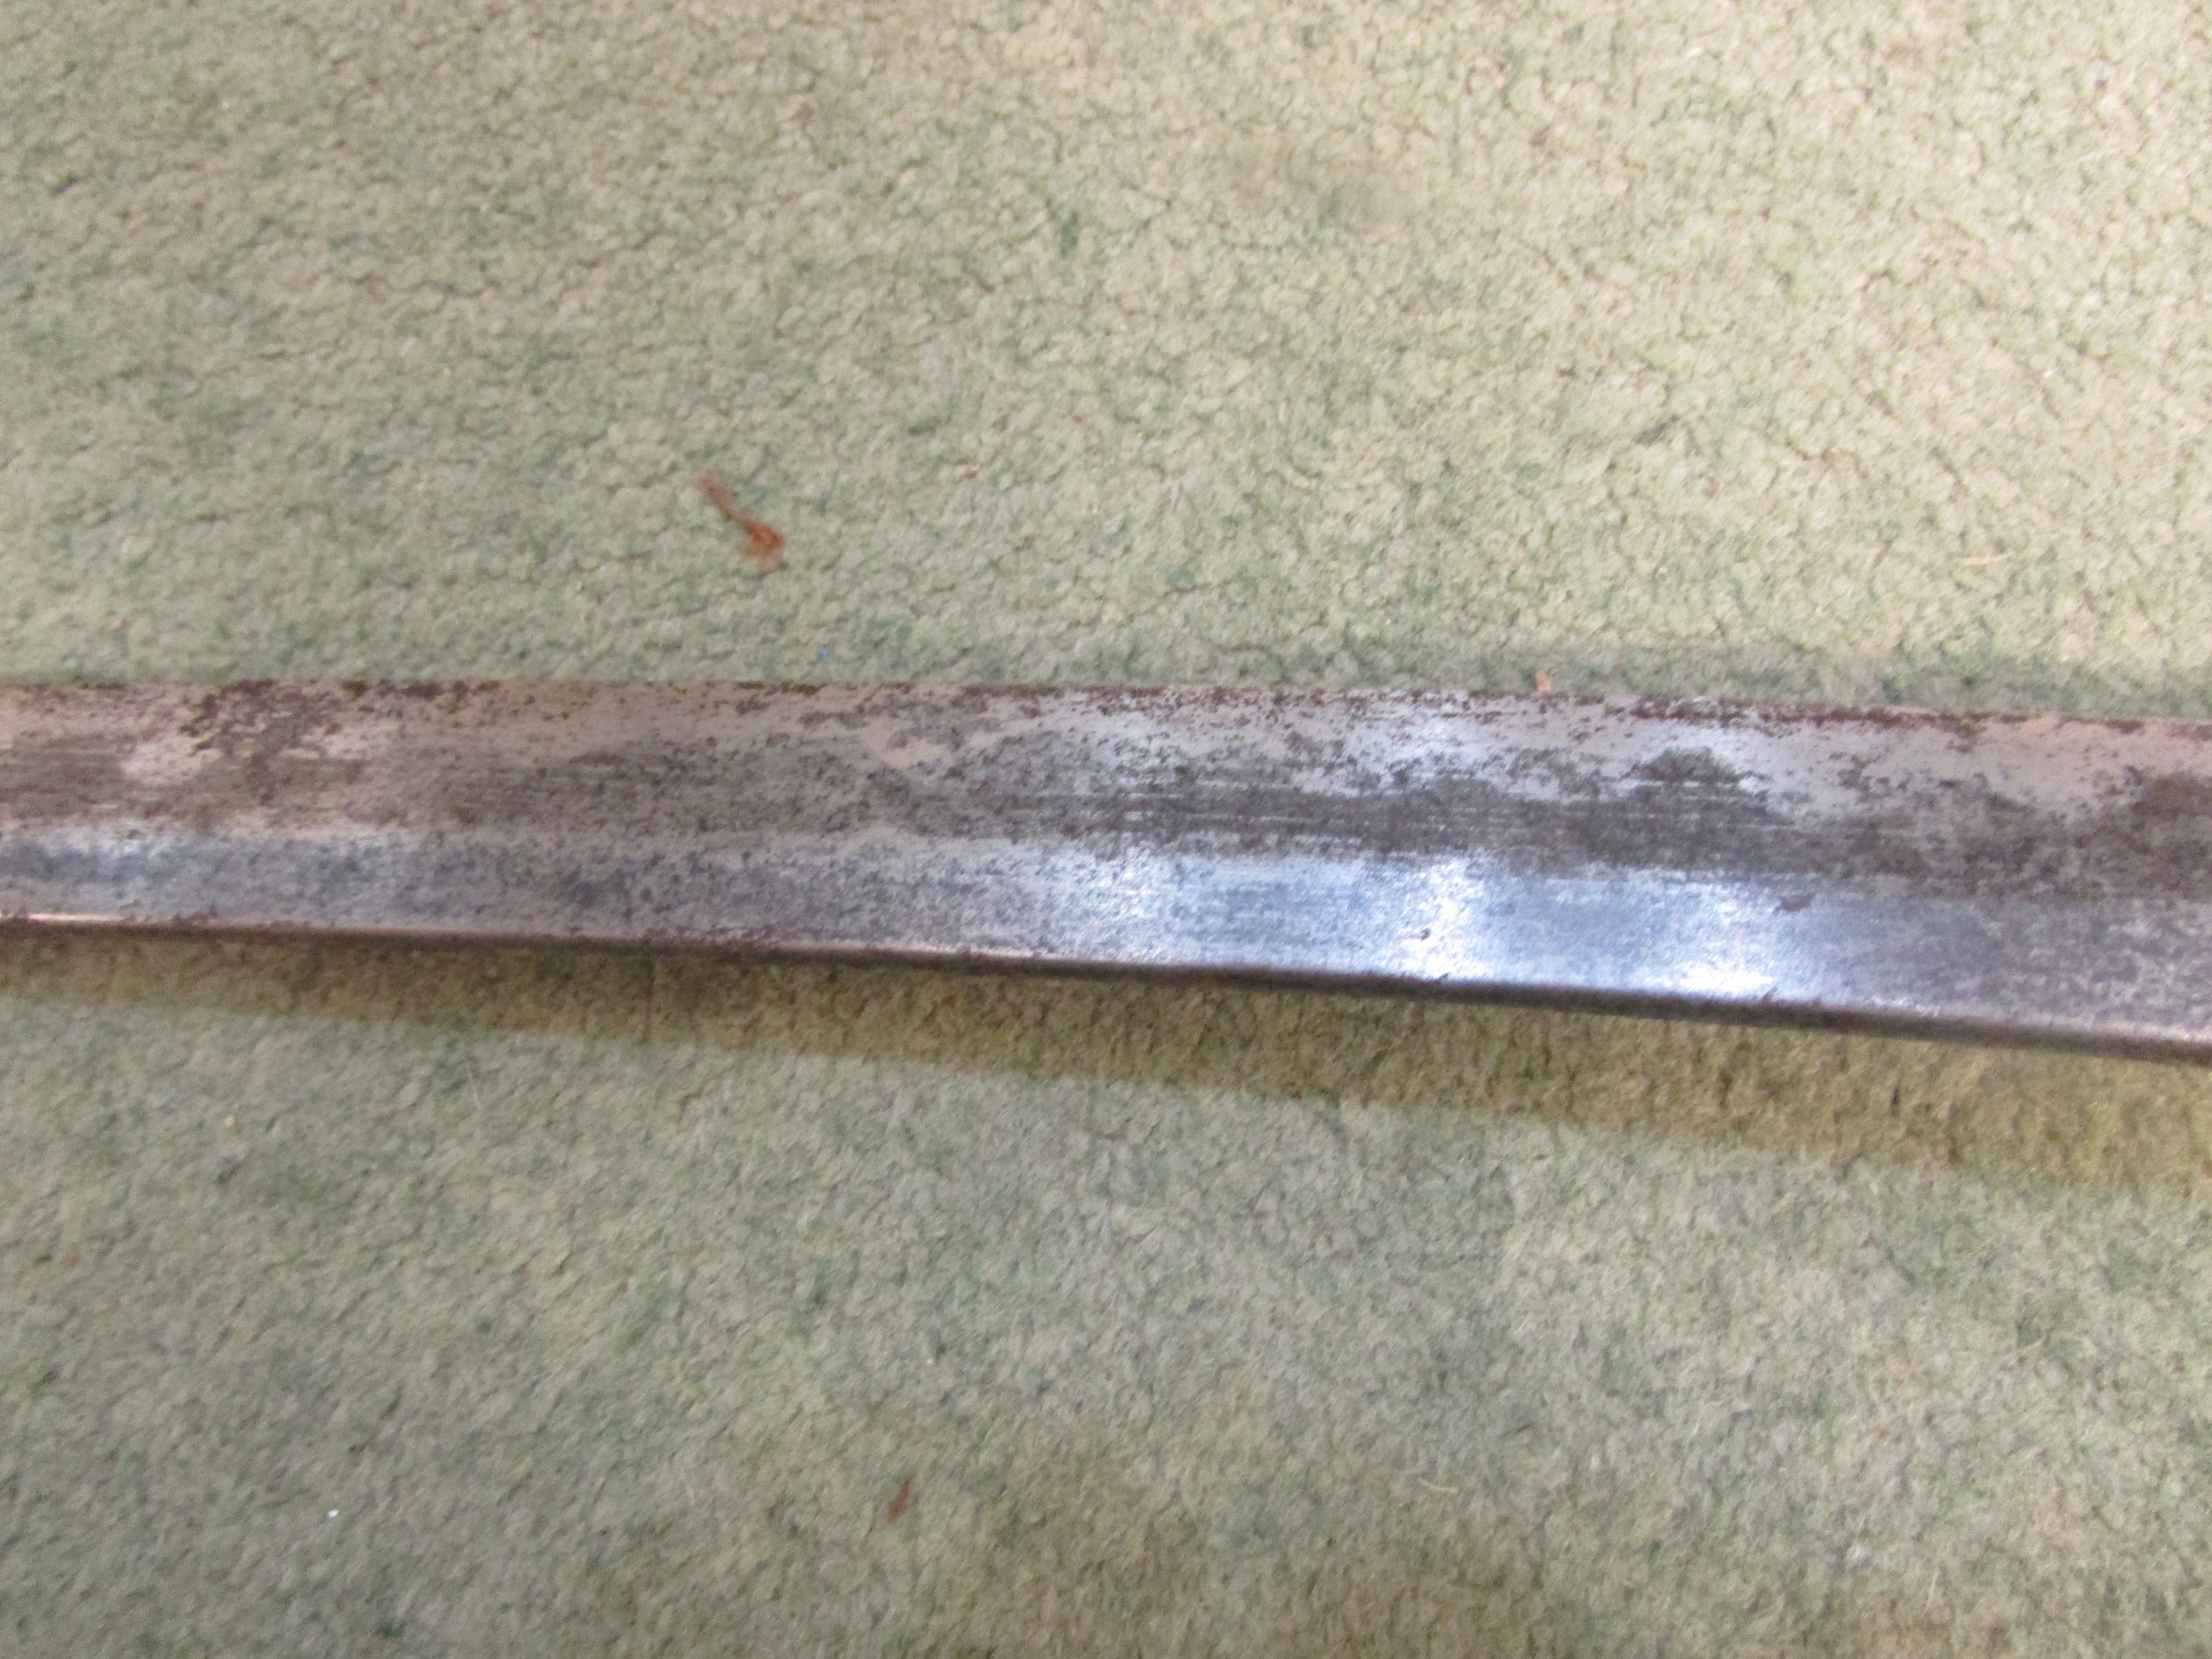 AN ANTIQUE JAPANESE KATANA SWORD WITH SHEATH, SOLD AS FOUND - Image 15 of 35